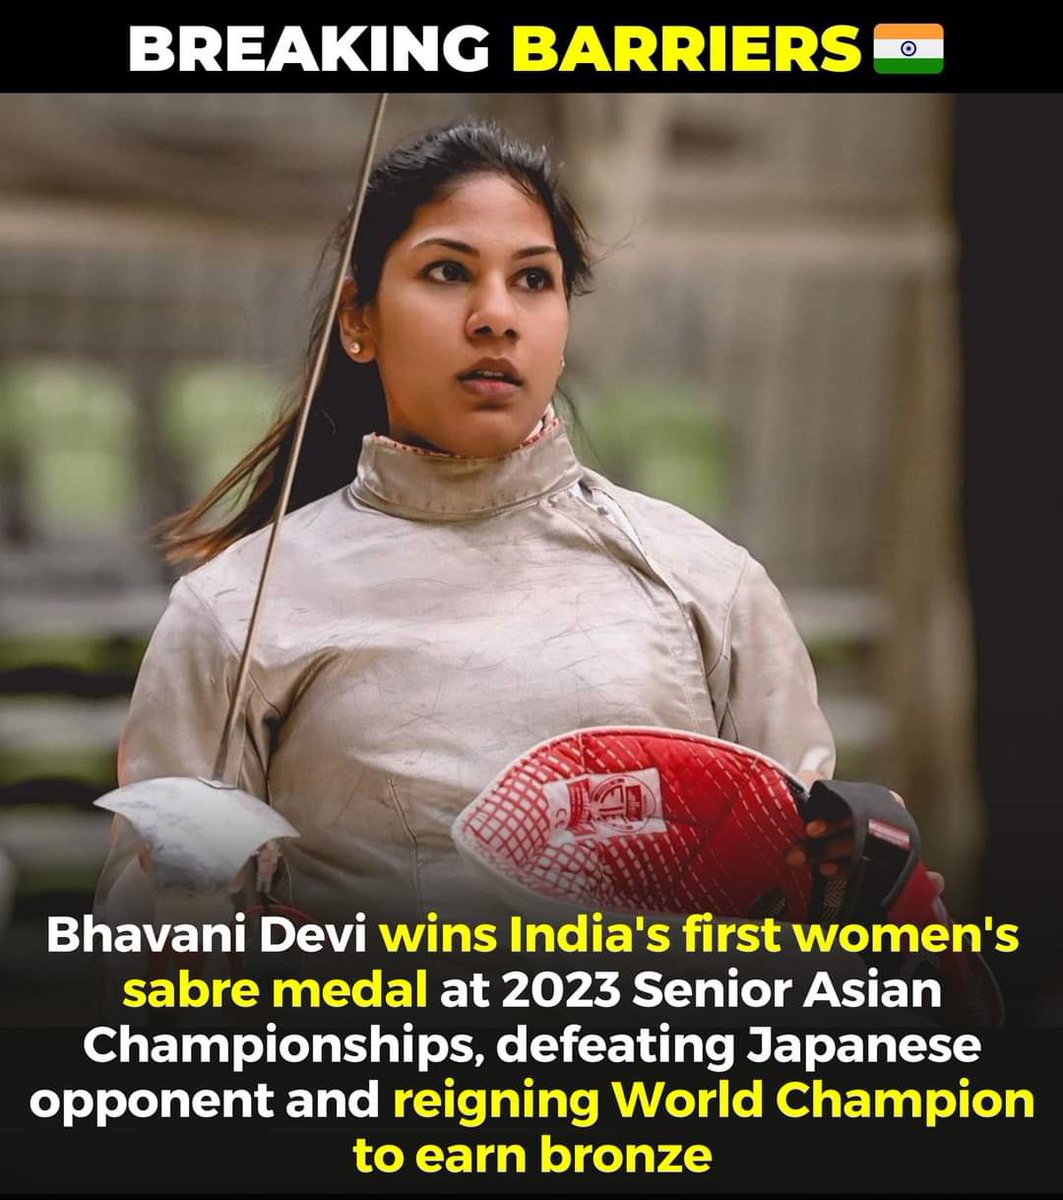 In remarkable achievement, C.A. Bhavani Devi, an Olympian frm Chennai, made history by securing India’s first-ever medal at Asian fencing championships held in Wuxi, China. Her outstanding performance & determination earned her a well-deserved bronze medal in prestigious event